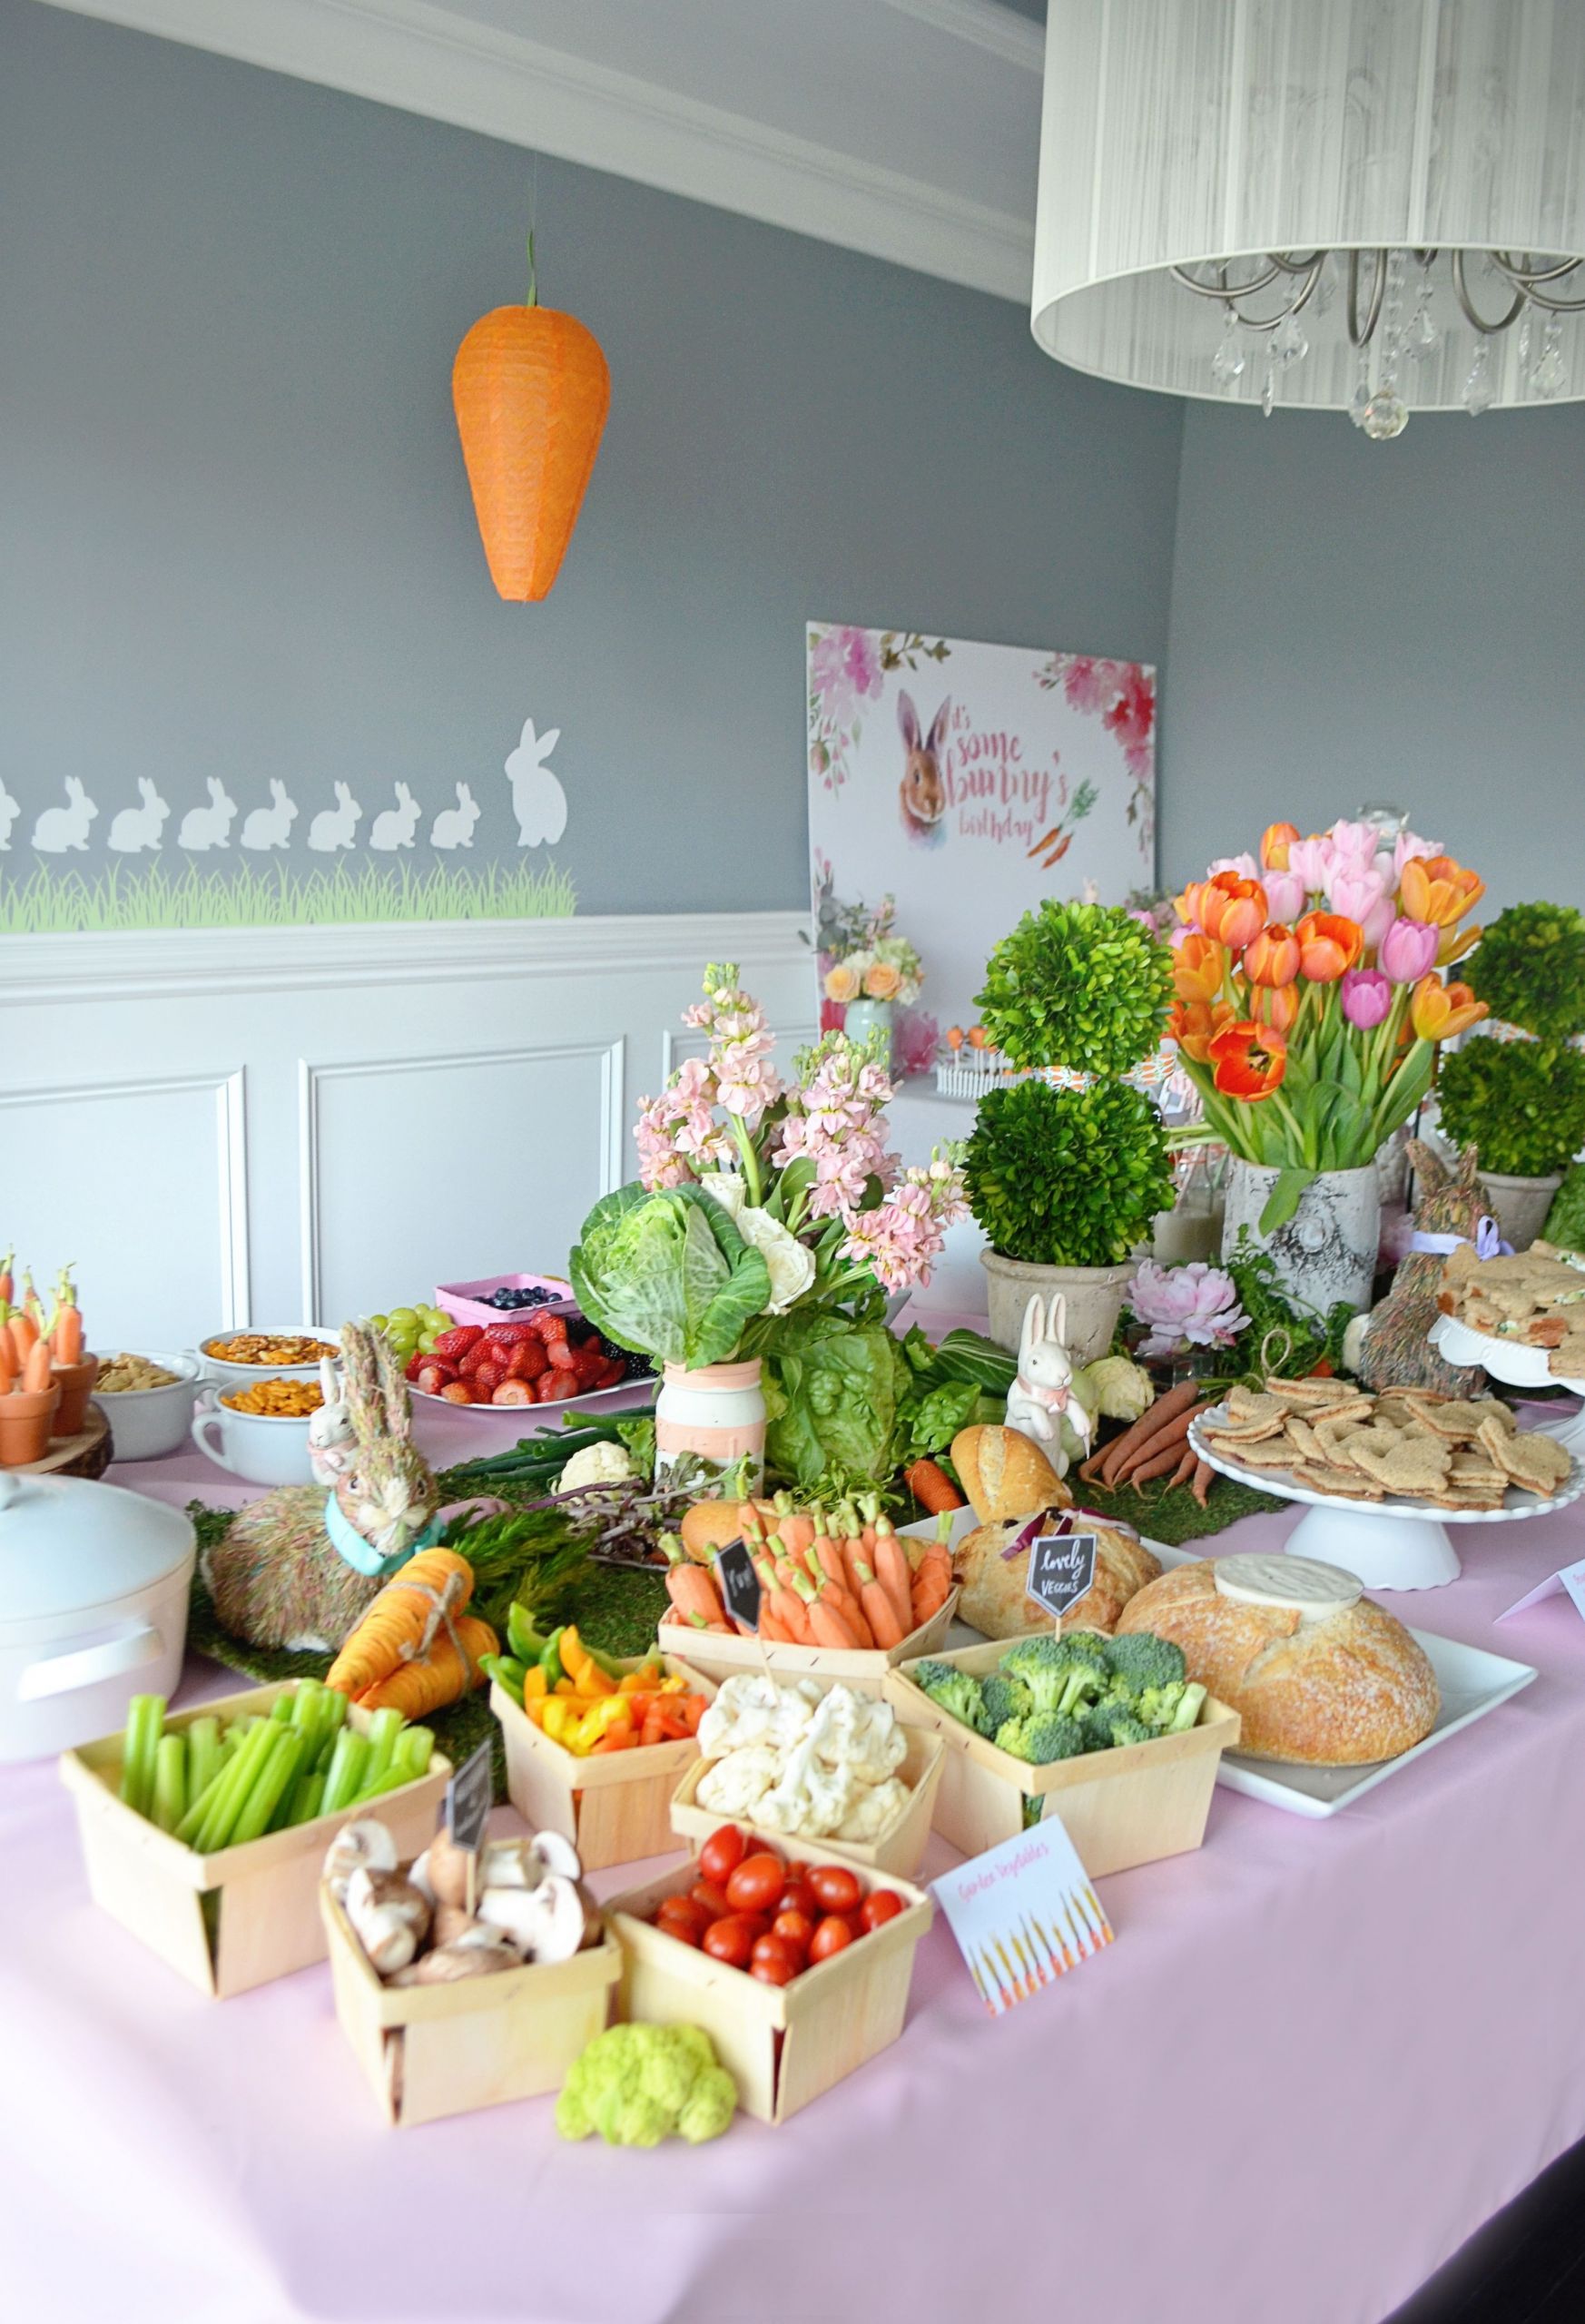 Party Ideas For Easter
 Shop the Party Bunny Themed Party